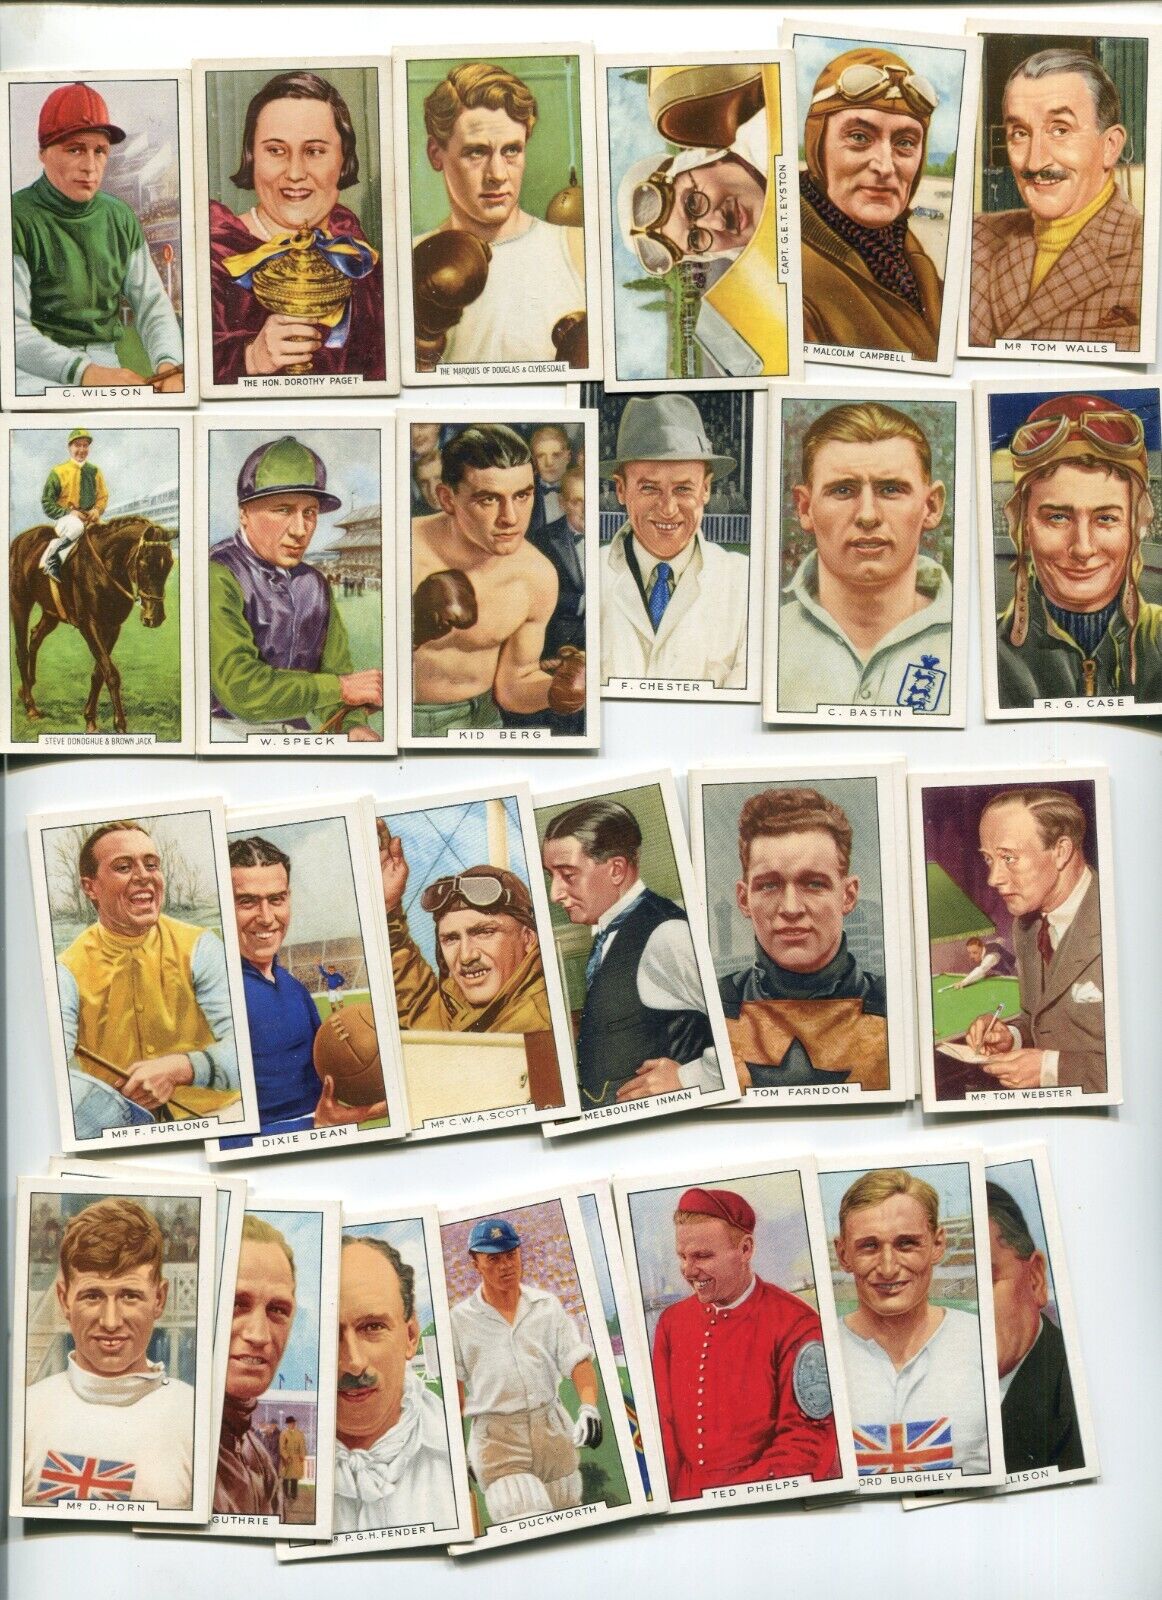 1936 GALLAHER Ltd CIGARETTES SPORTING PERSONALITIES 48 TOBACCO CARD SET